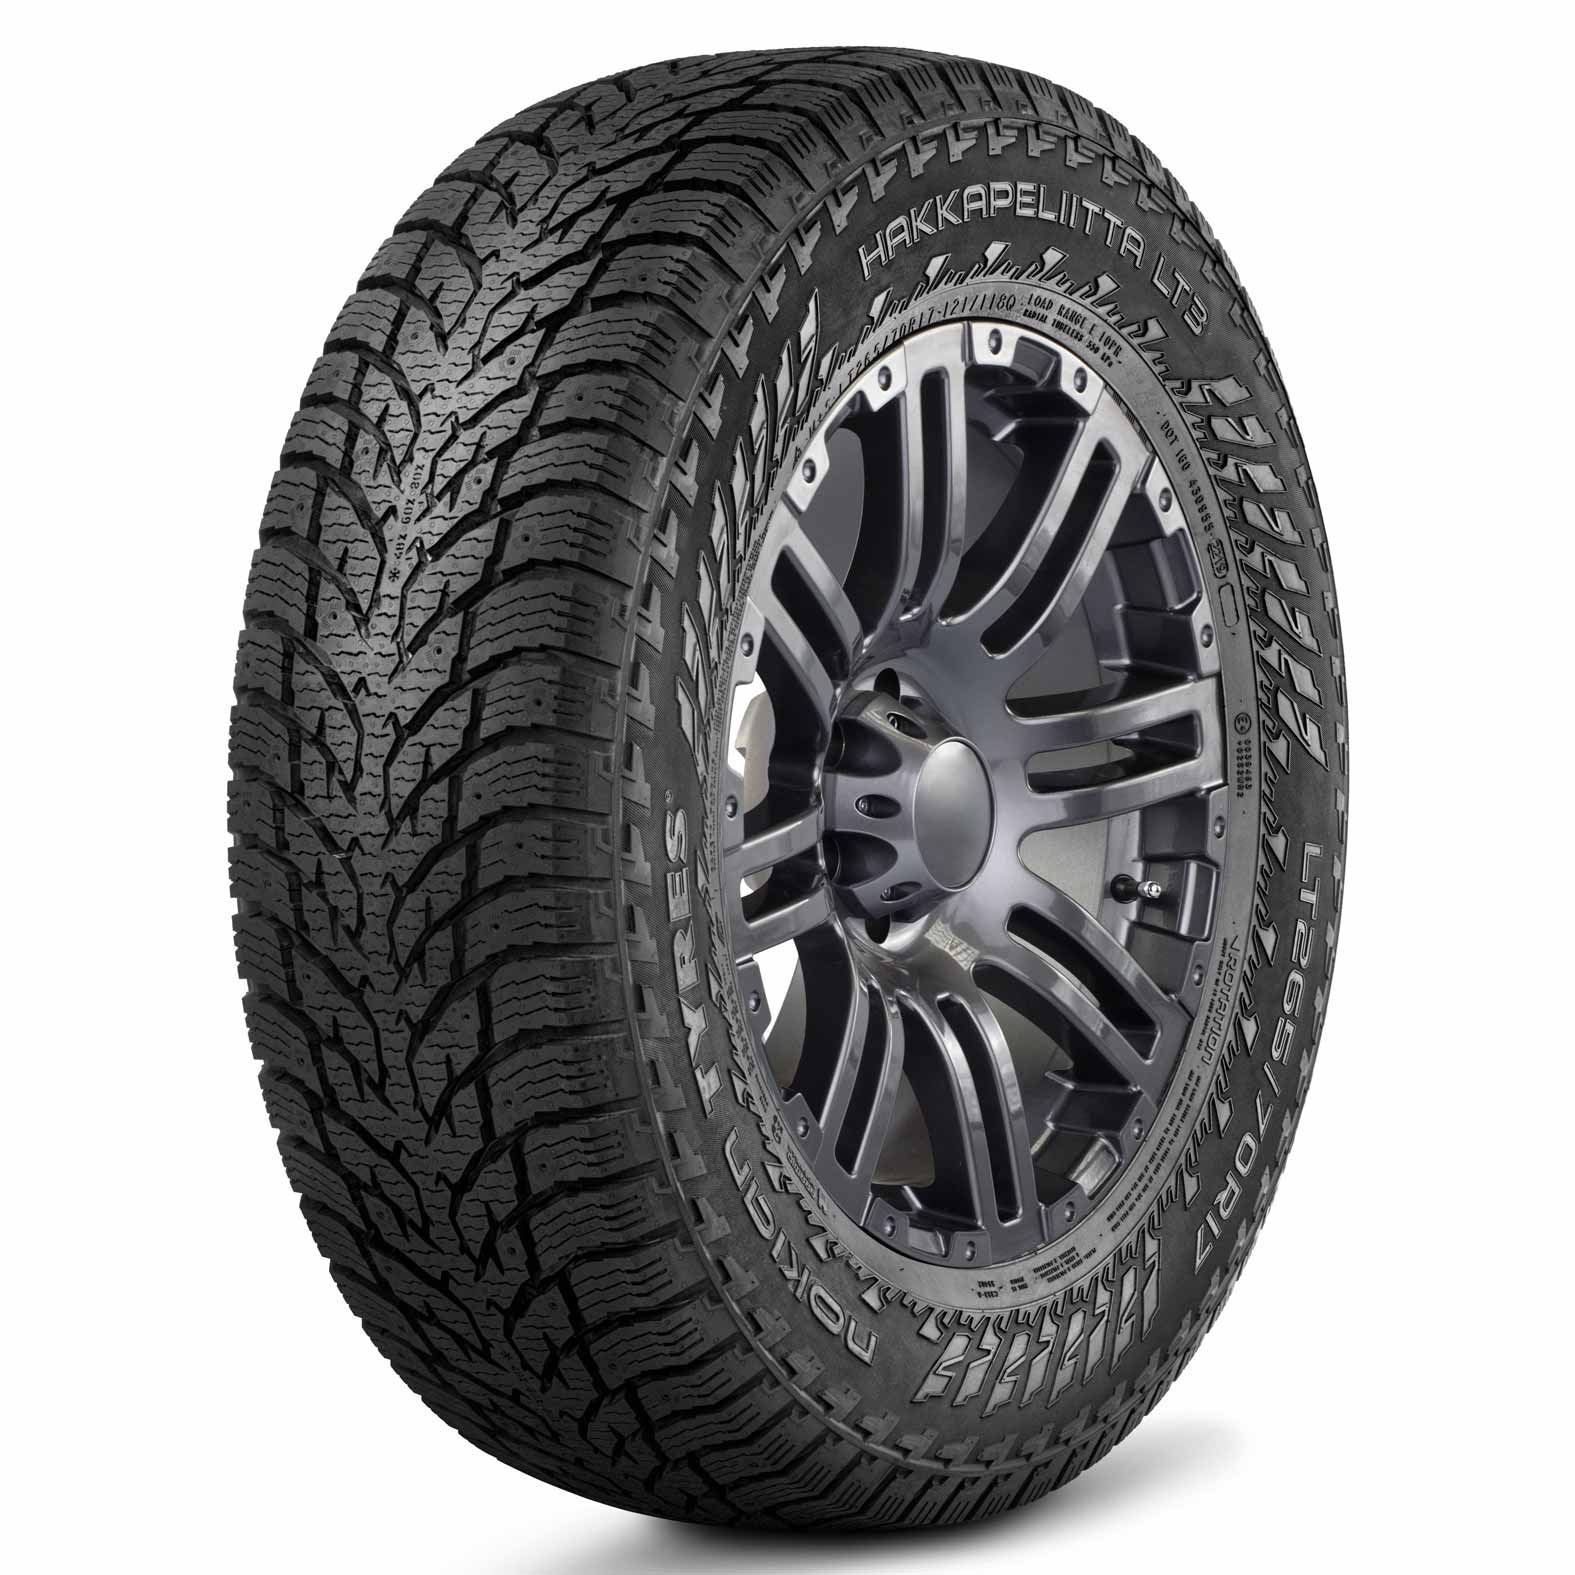 225 45r17 Studded Snow Tires Steven donofrio